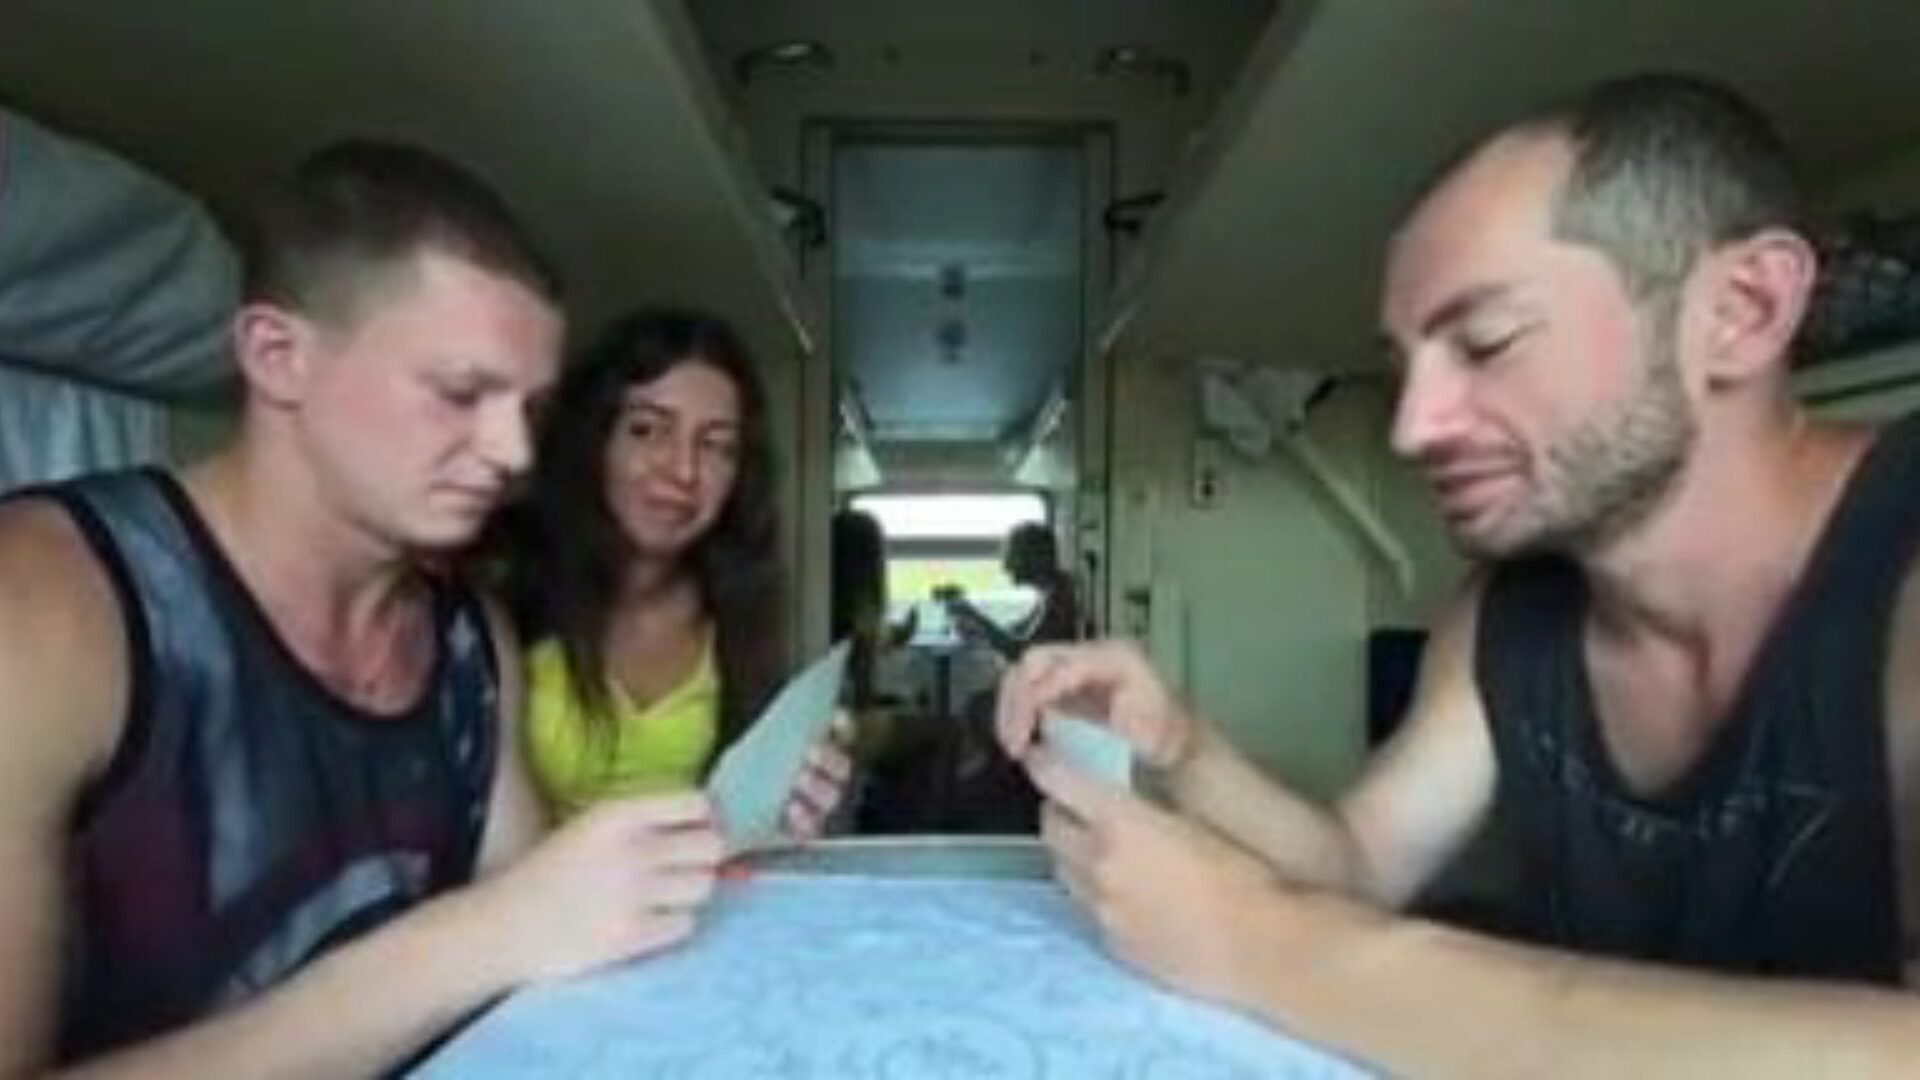 Russian Wife Share in Train, Free Wife List Porn Video 82 Watch Russian Wife Share in Train episode on xHamster, the most excellent lovemaking tube web page with tons of free Wife List Xxx Share & Sharing GF pornography movie scenes